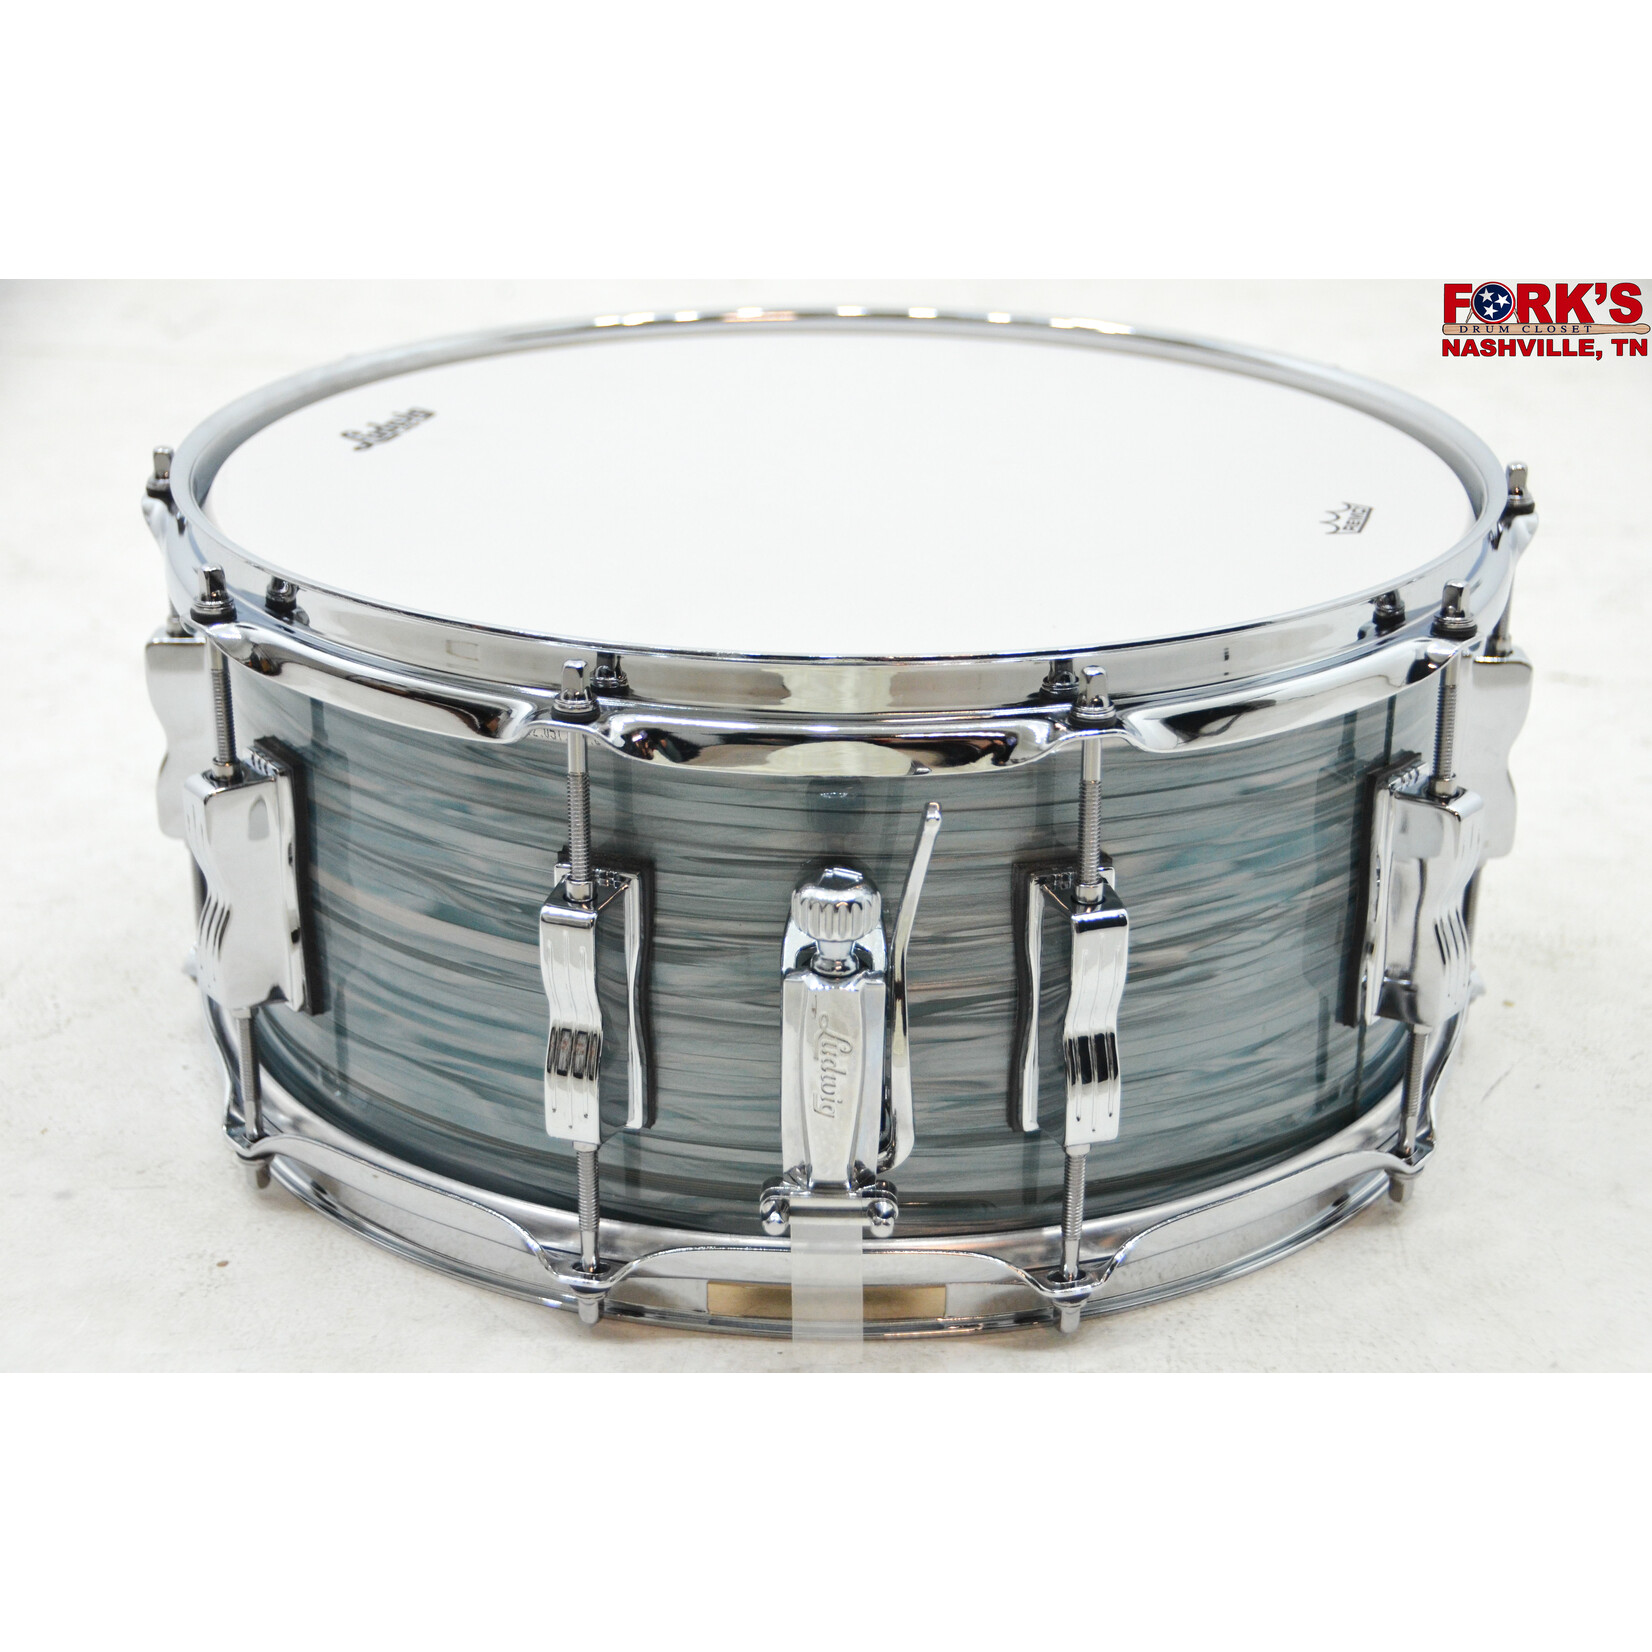 Ludwig Ludwig Classic Maple 6.5x14 Snare Drum - "Vintage Blue Oyster"